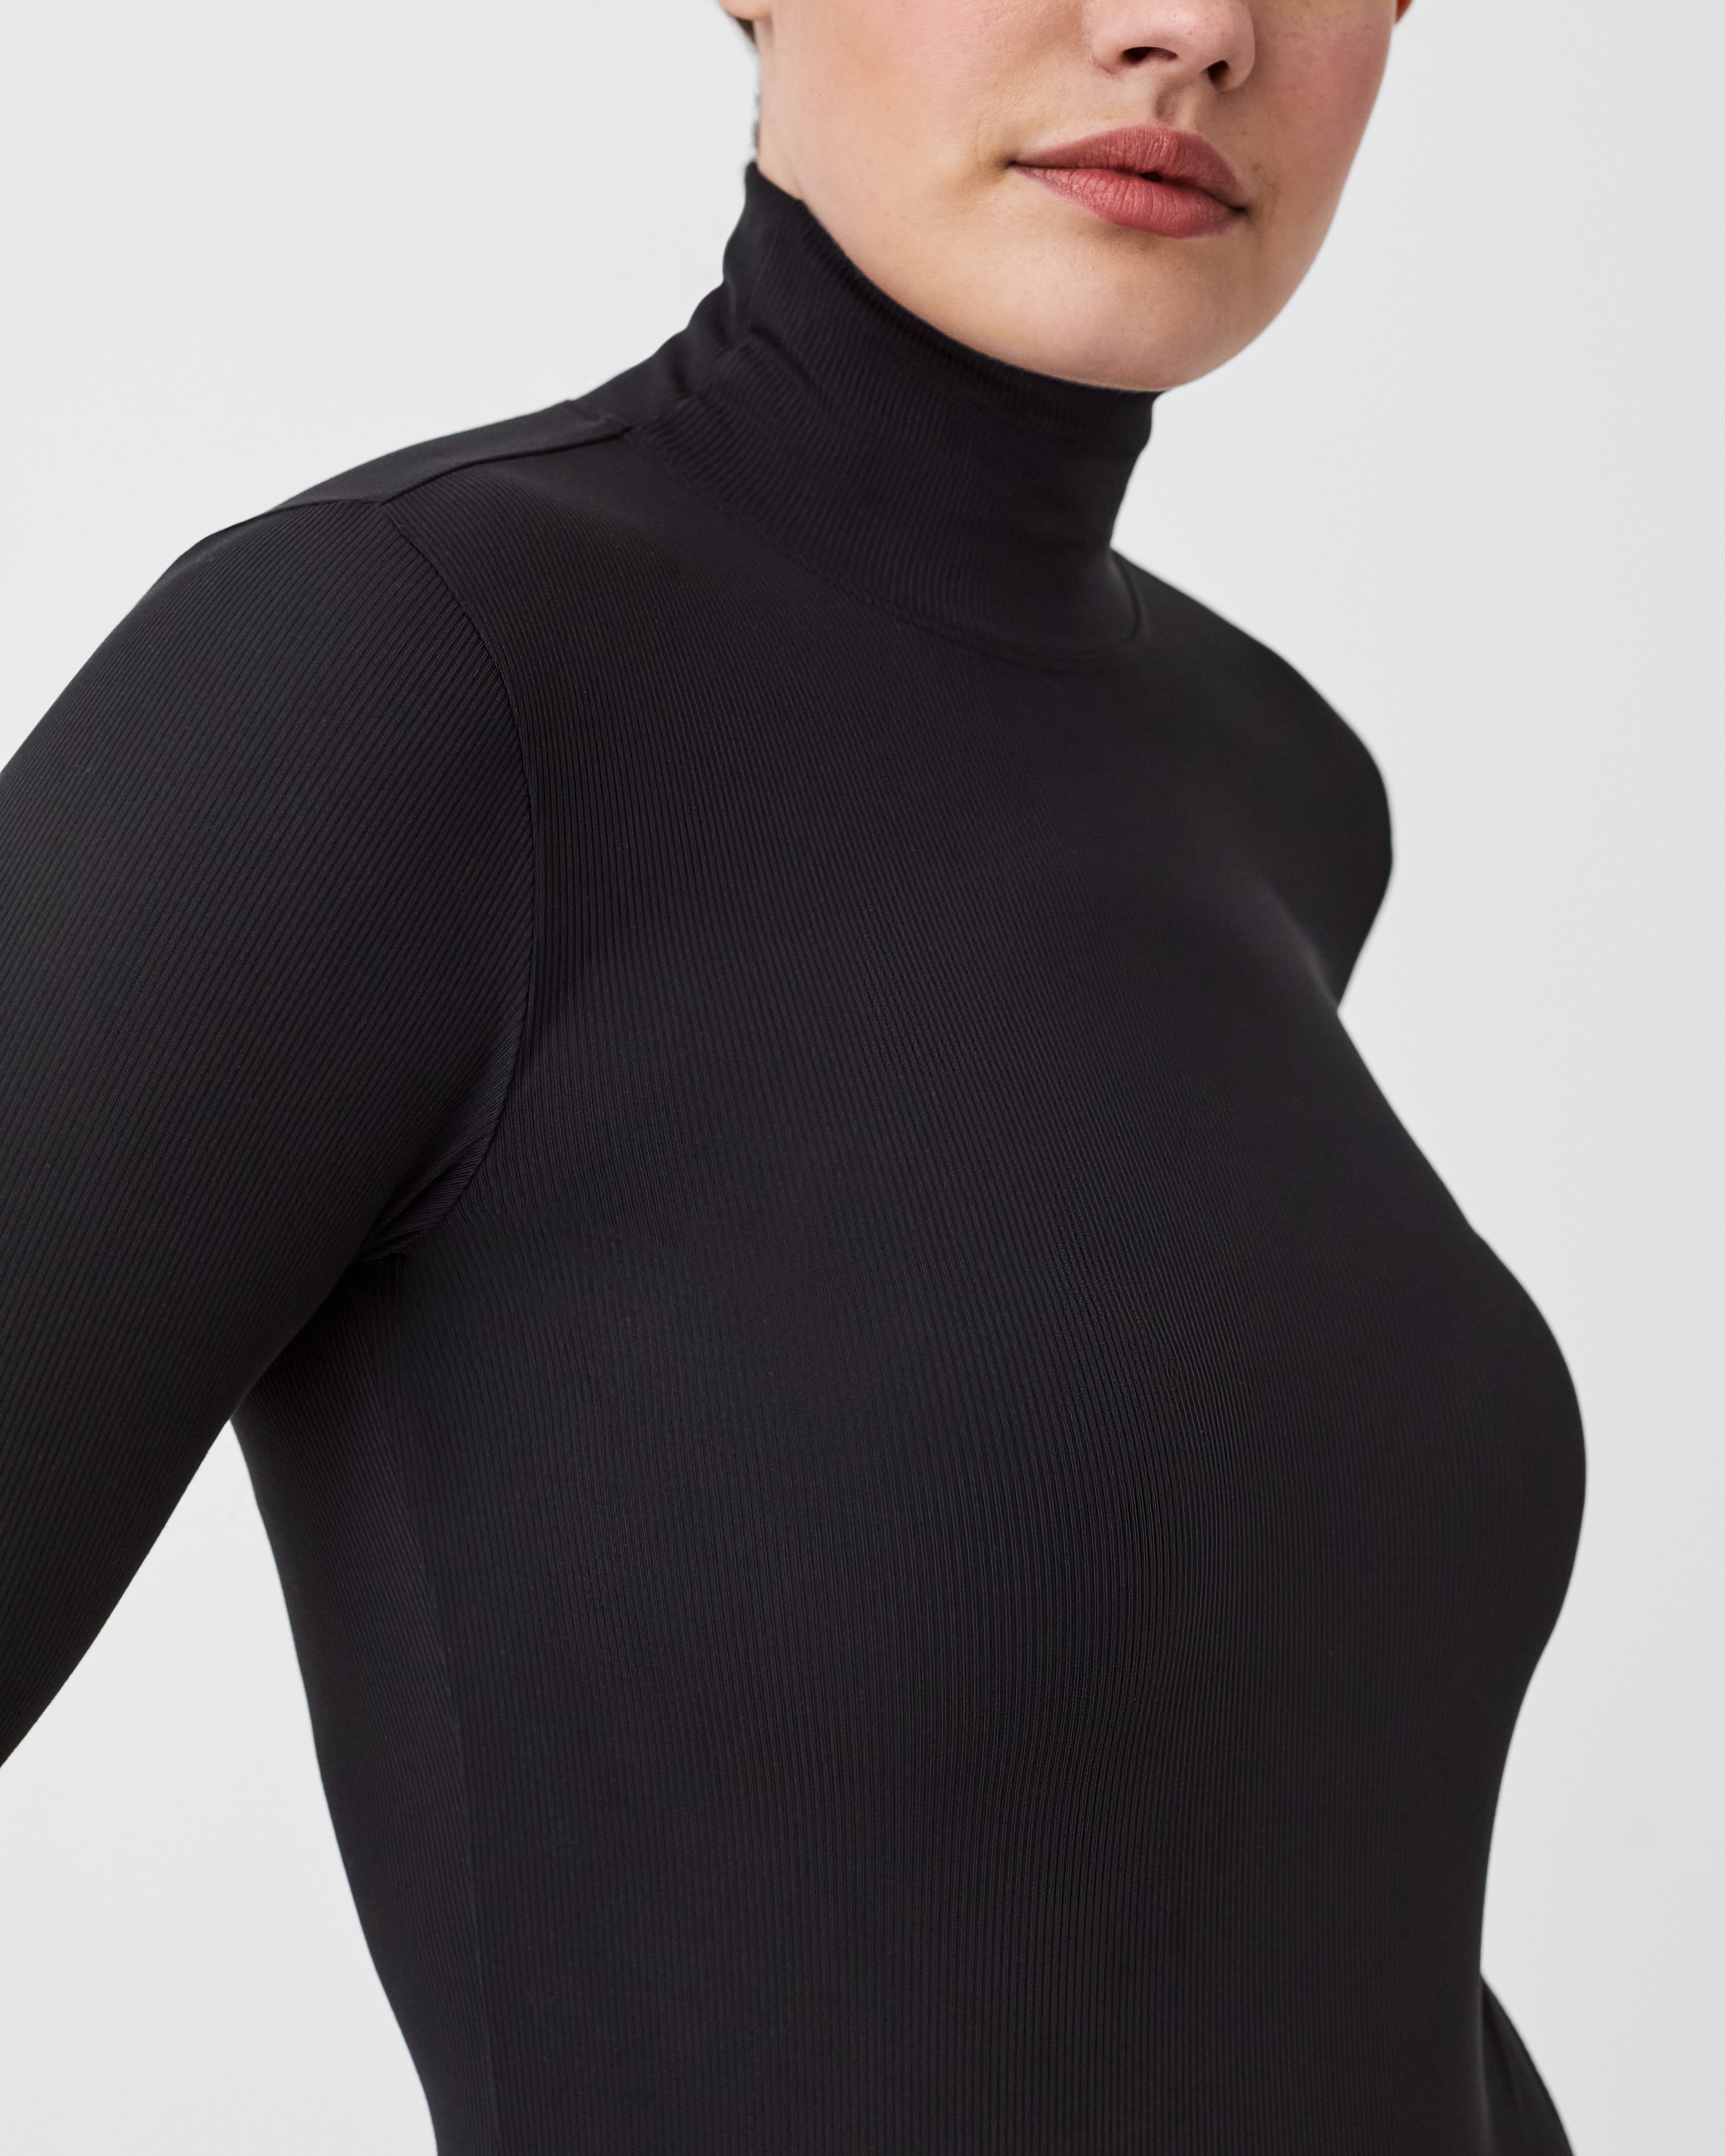 SPANX Suit Yourself long-sleeved Body - Farfetch